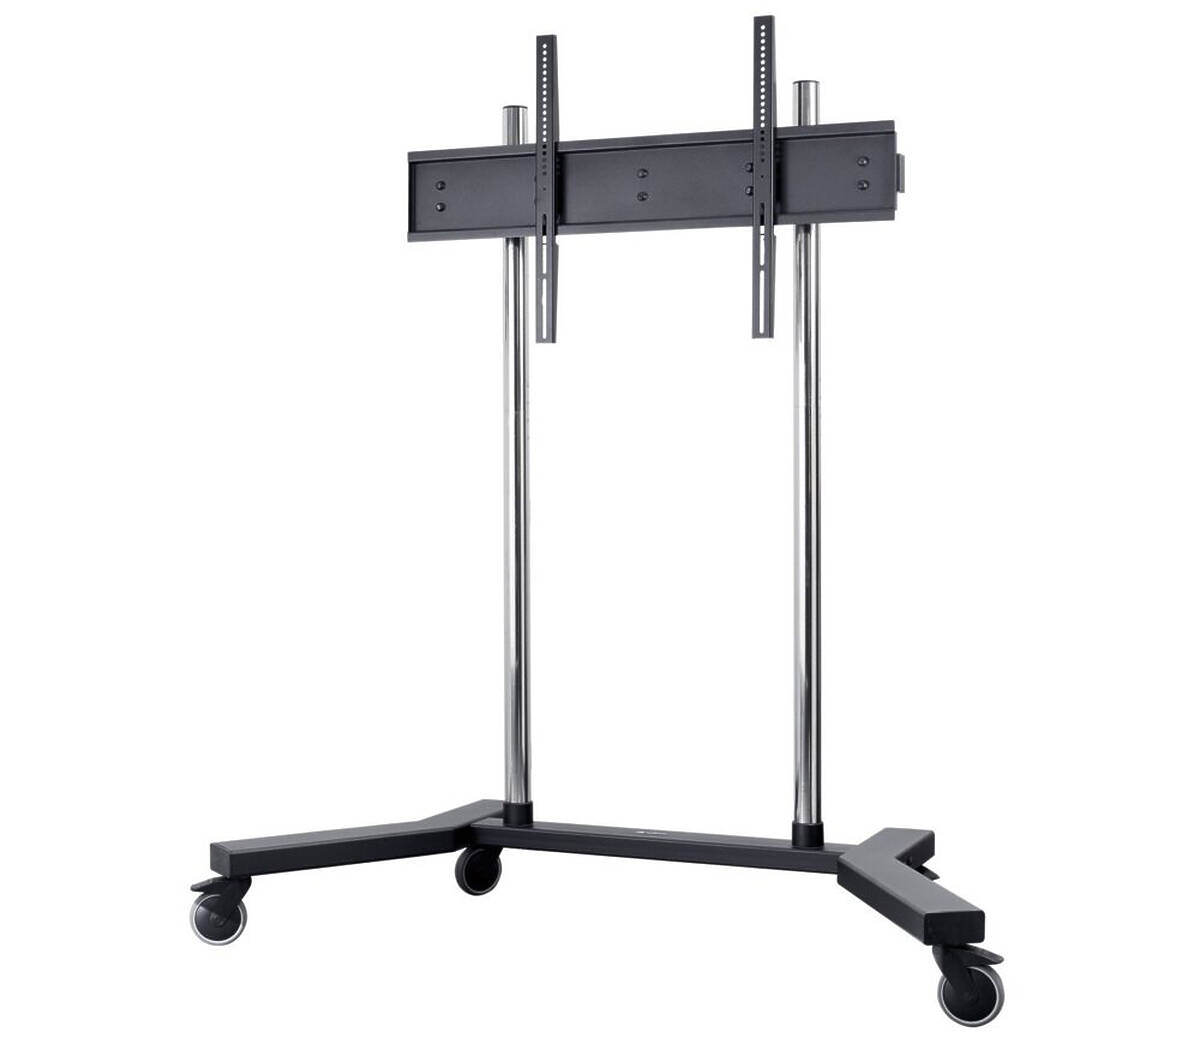 Edbak TR18 Universal Flat Screen Monitor/TV Trolley for 60-98" screens product image. Click to enlarge.